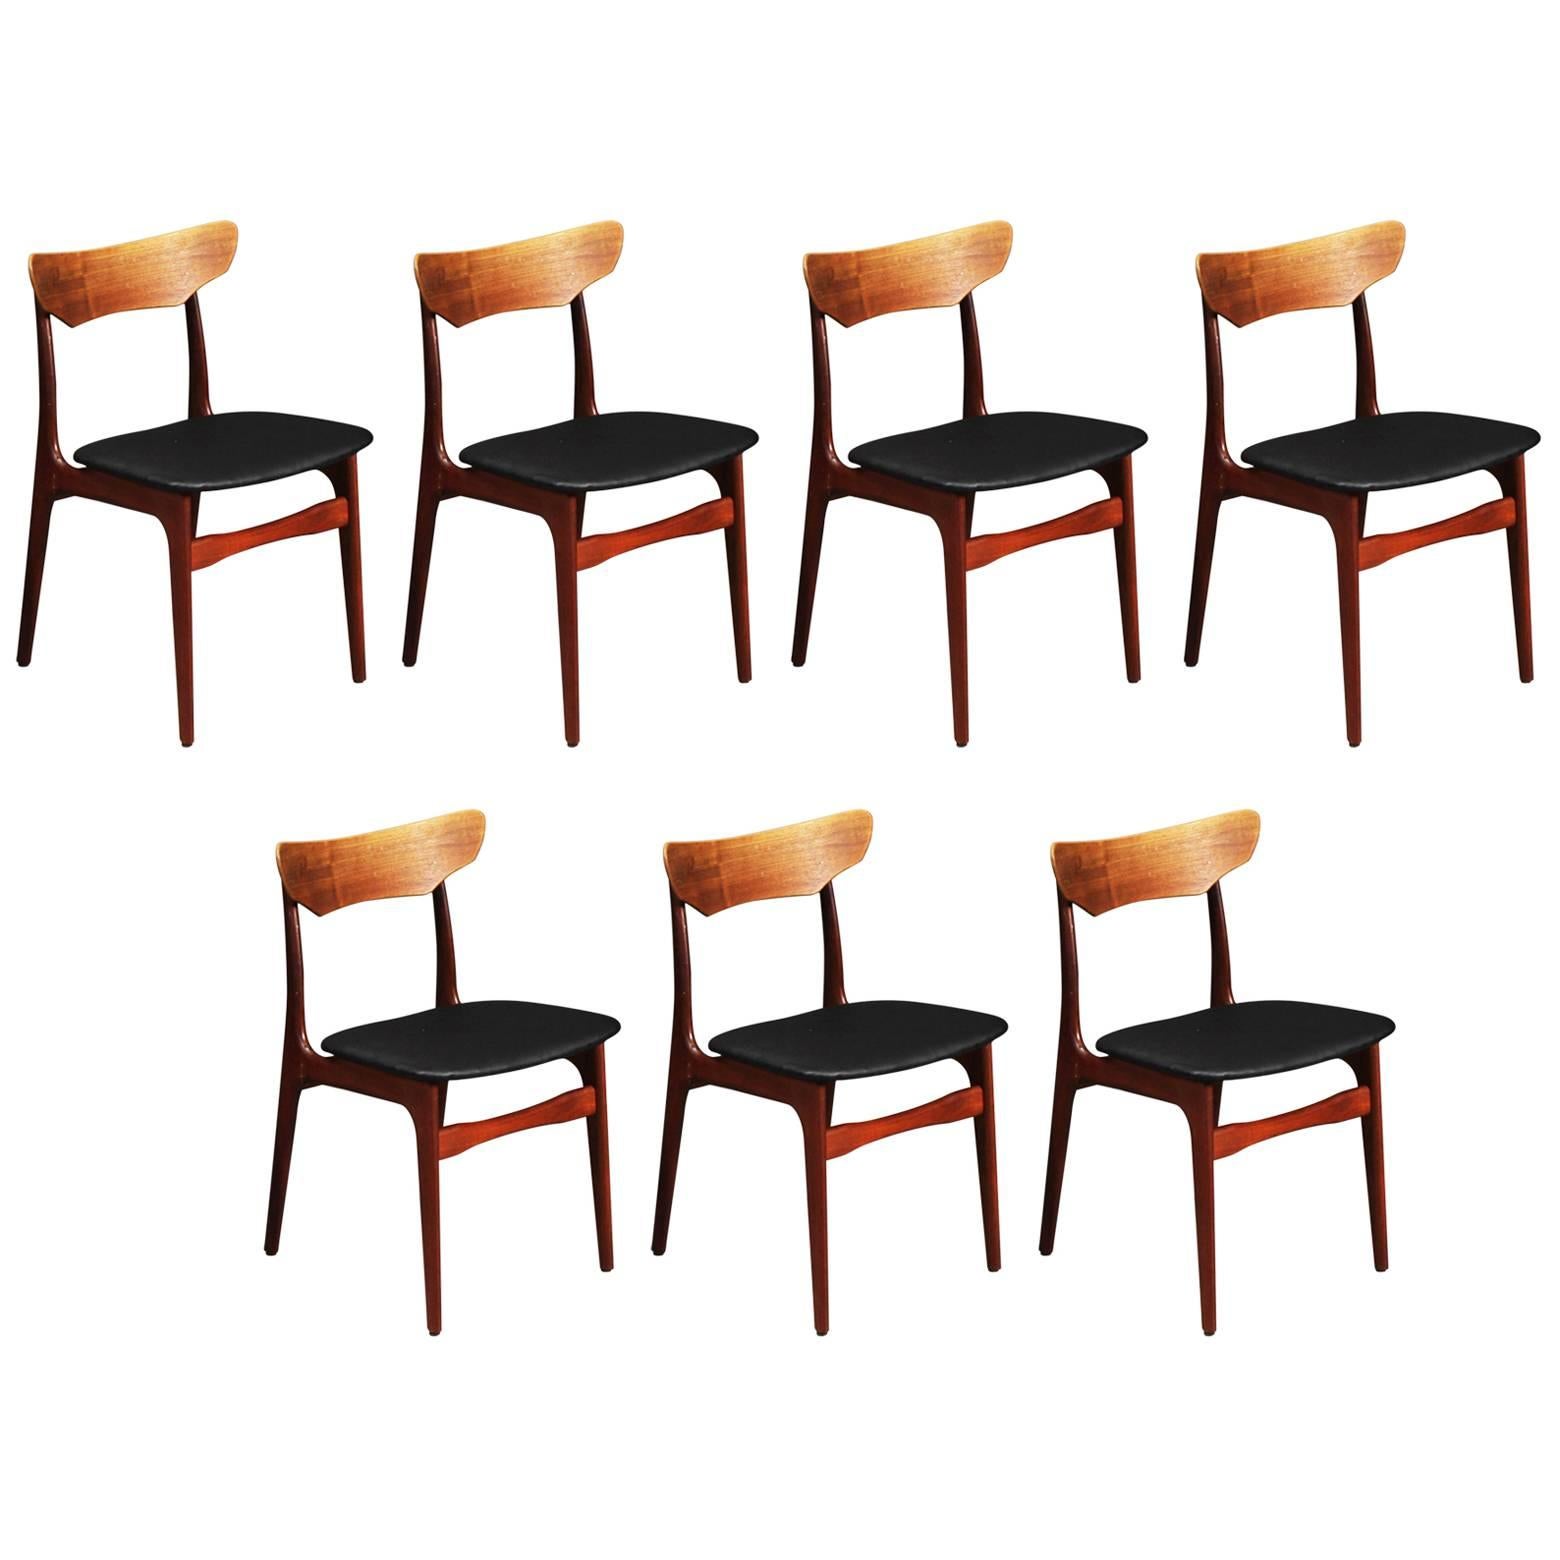 Up to Seven Schønning & Elgaard Dining Chairs